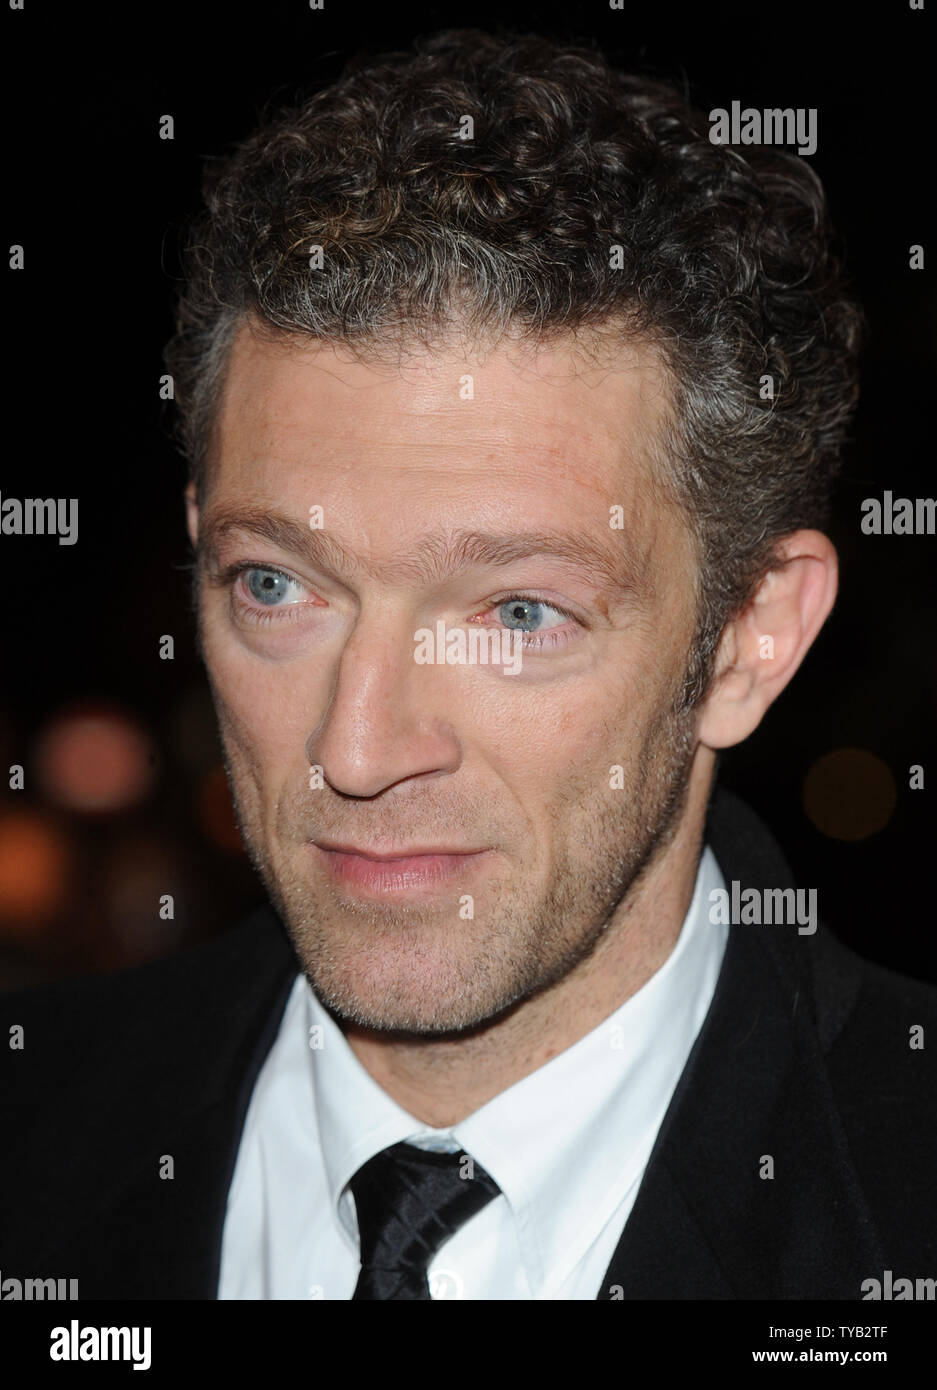 French actor Vincent Cassel attends the premiere of "Black at Vue, Leicester Square in London on 22, 2010. Hellestad Stock Photo - Alamy